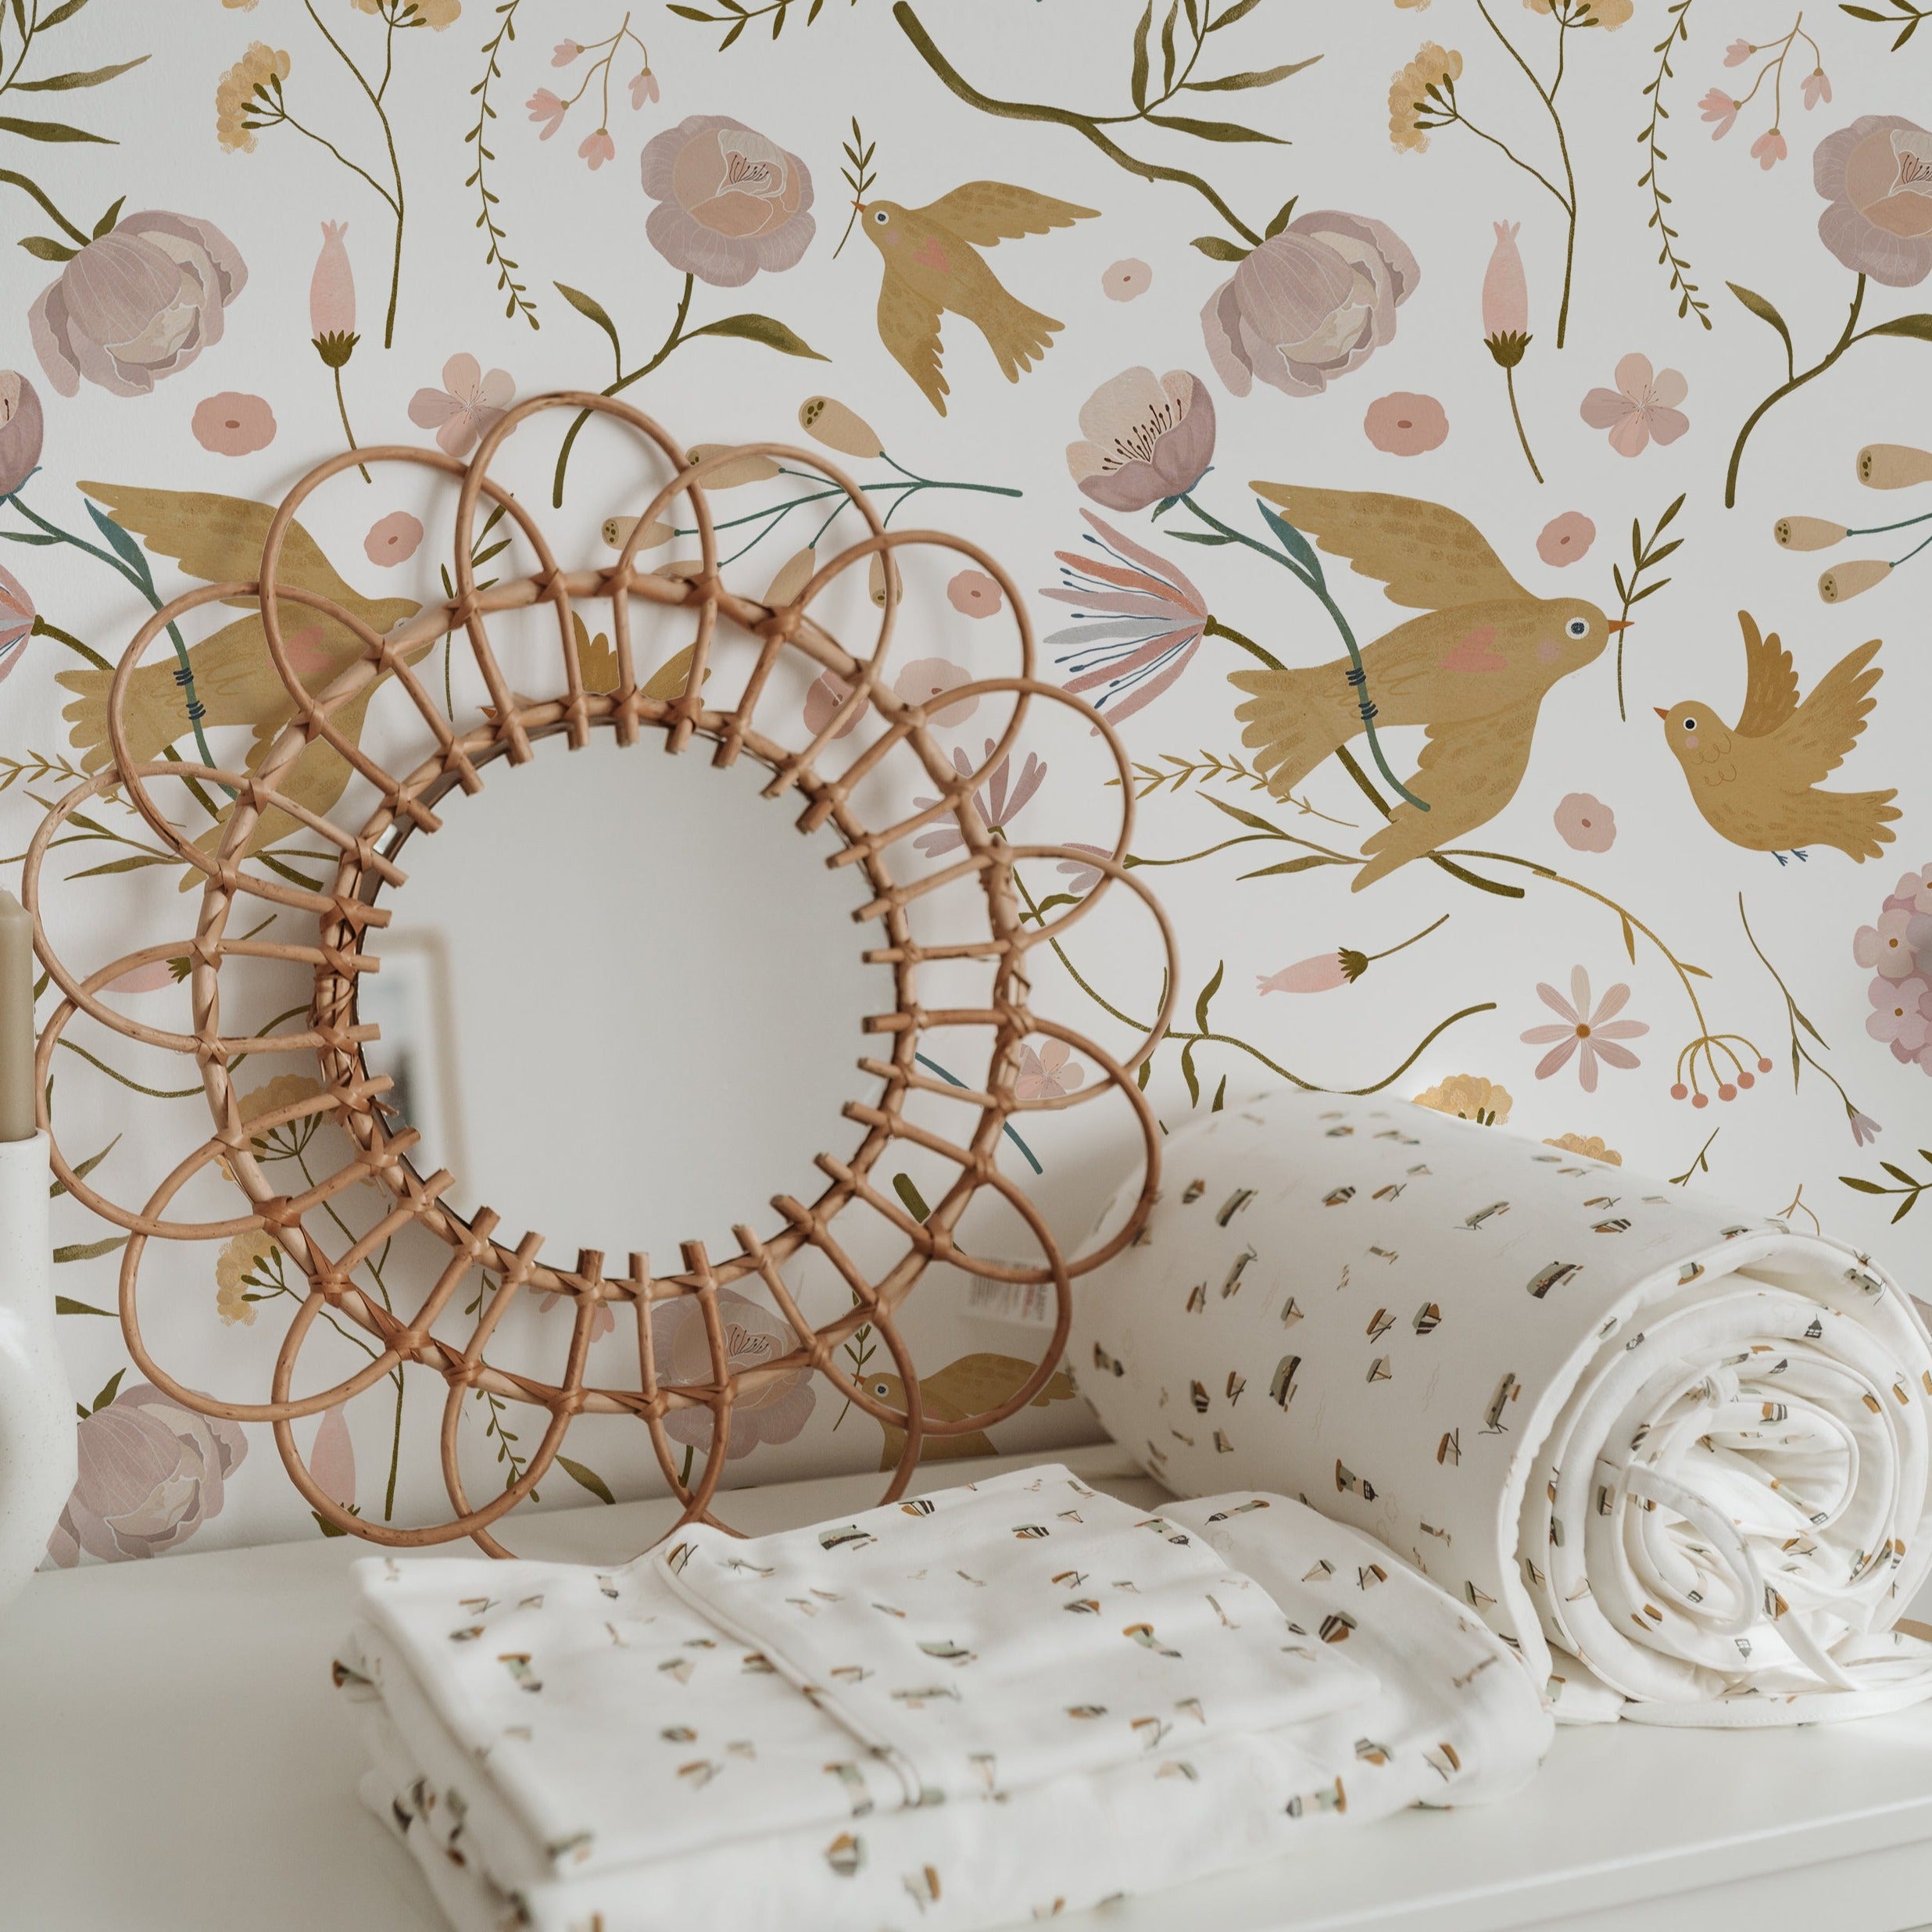 A decorative setting featuring the Pastel Garden Wallpaper, with a woven circular mirror and floral-printed textiles enhancing the wallpaper's intricate pattern of birds and blossoms.